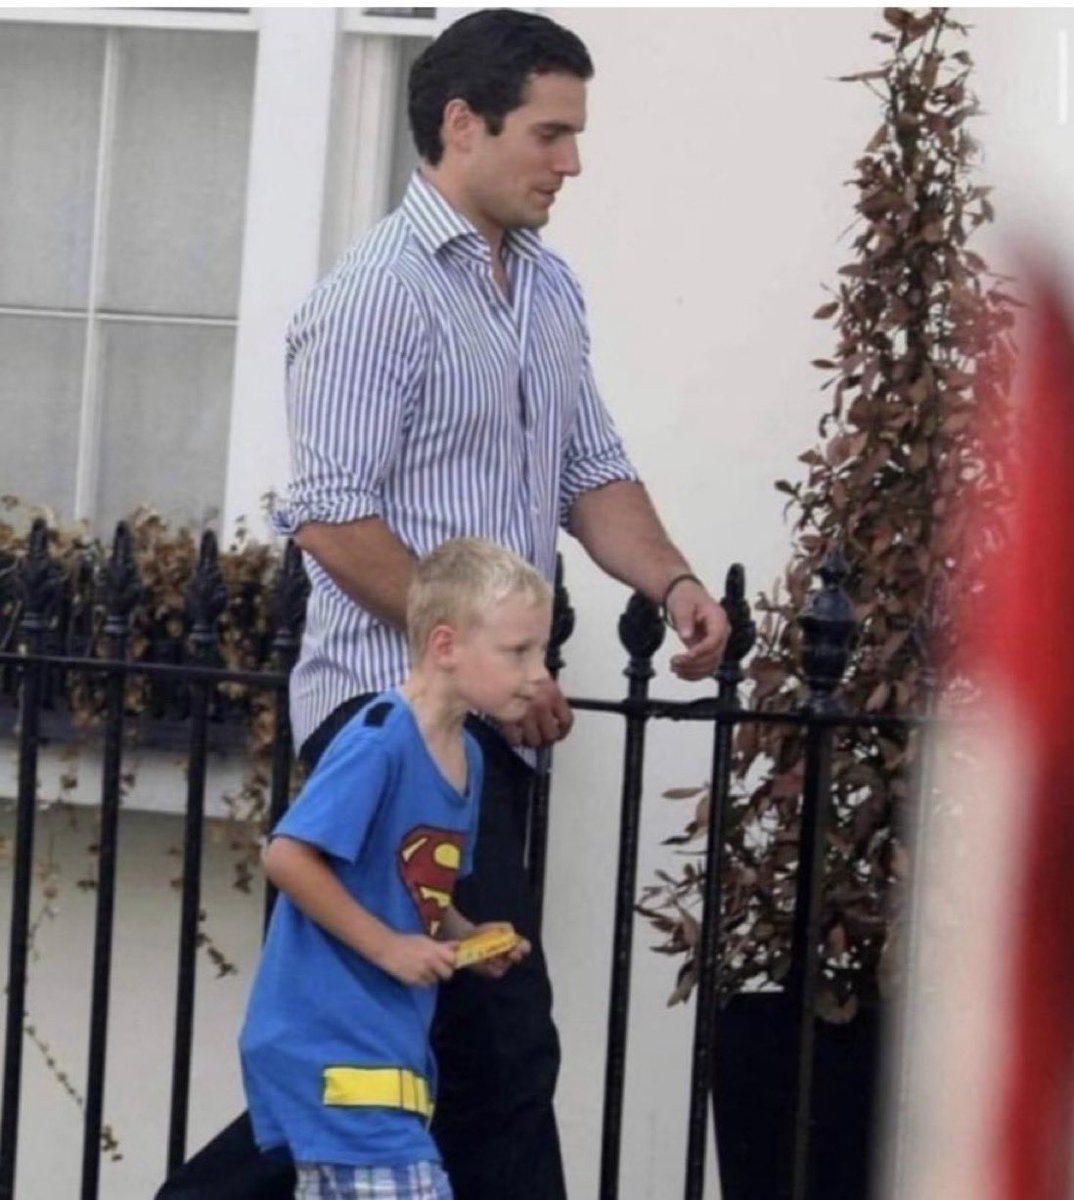 @Morbidful This is Tom and he’s 7 years old. One day he told his schoolmates that his uncle was Superman. The other kids made fun of him and no one believed him. Then his mother made a call, and she asked her brother-in-law to take him to school one day. And Henry Cavill, of course, was